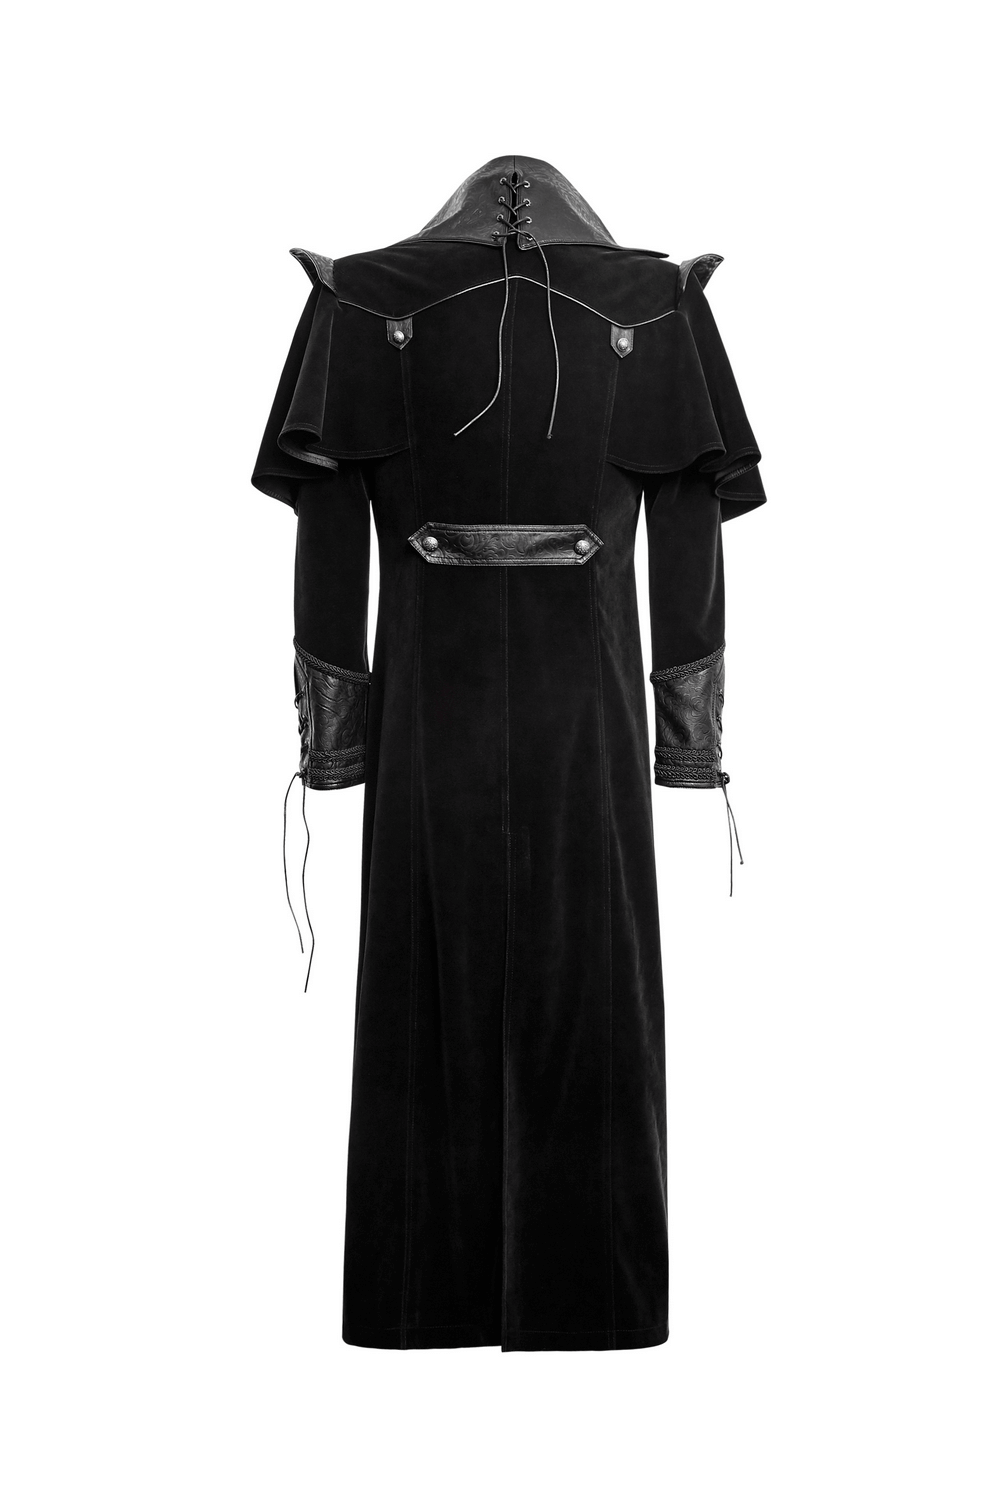 Vintage Gothic Male Velvet Cloak with Leather Accents - HARD'N'HEAVY